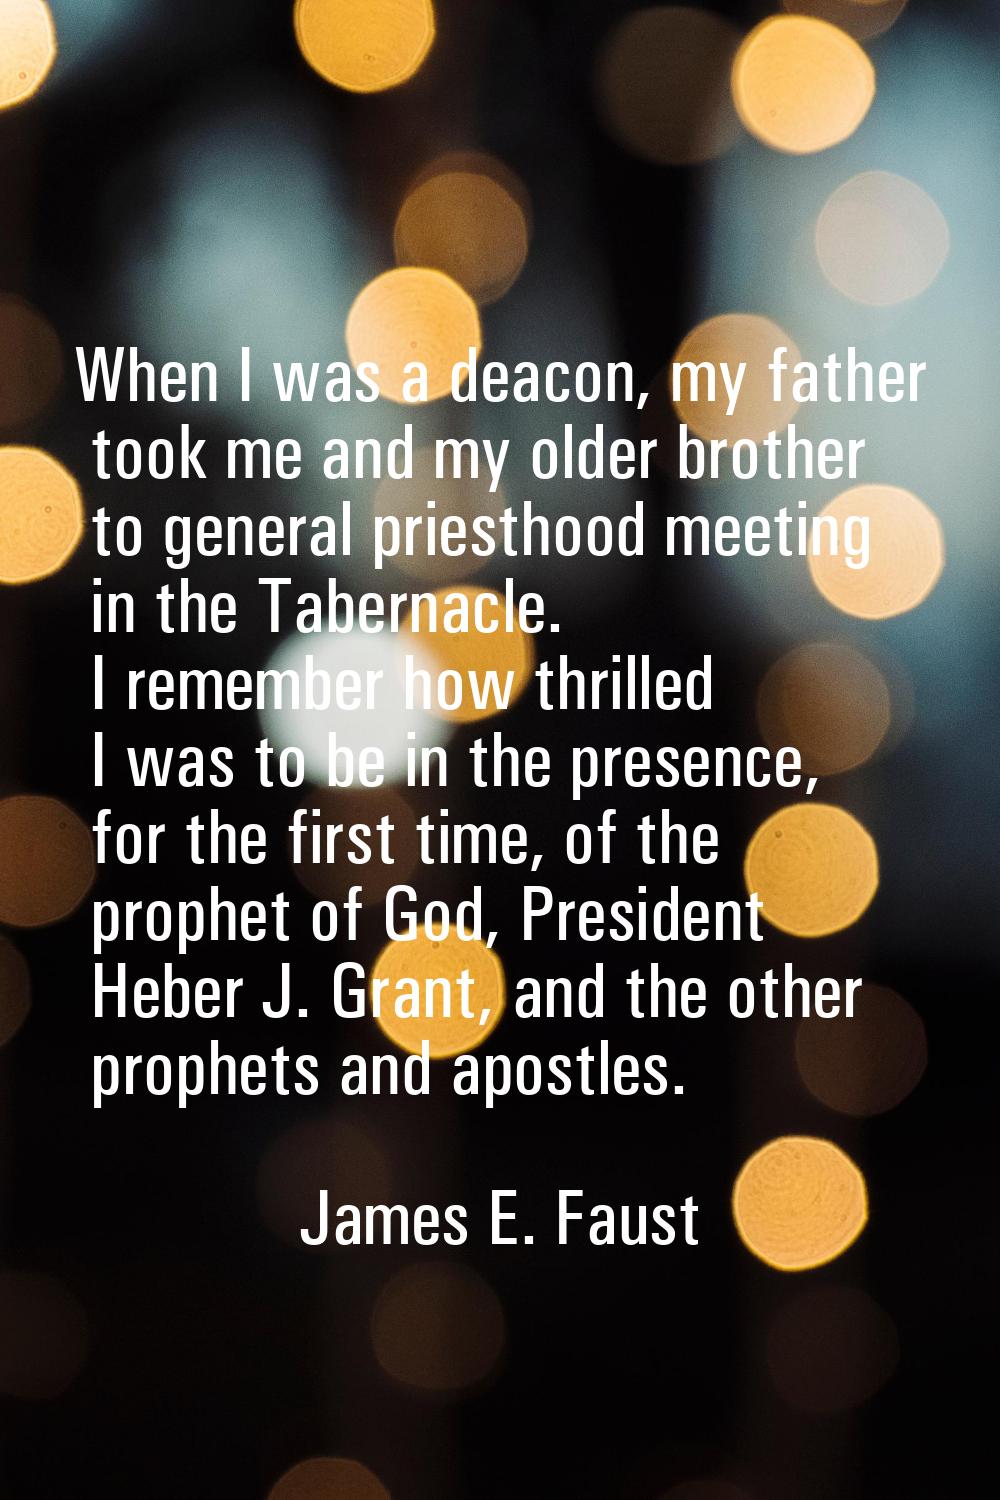 When I was a deacon, my father took me and my older brother to general priesthood meeting in the Ta